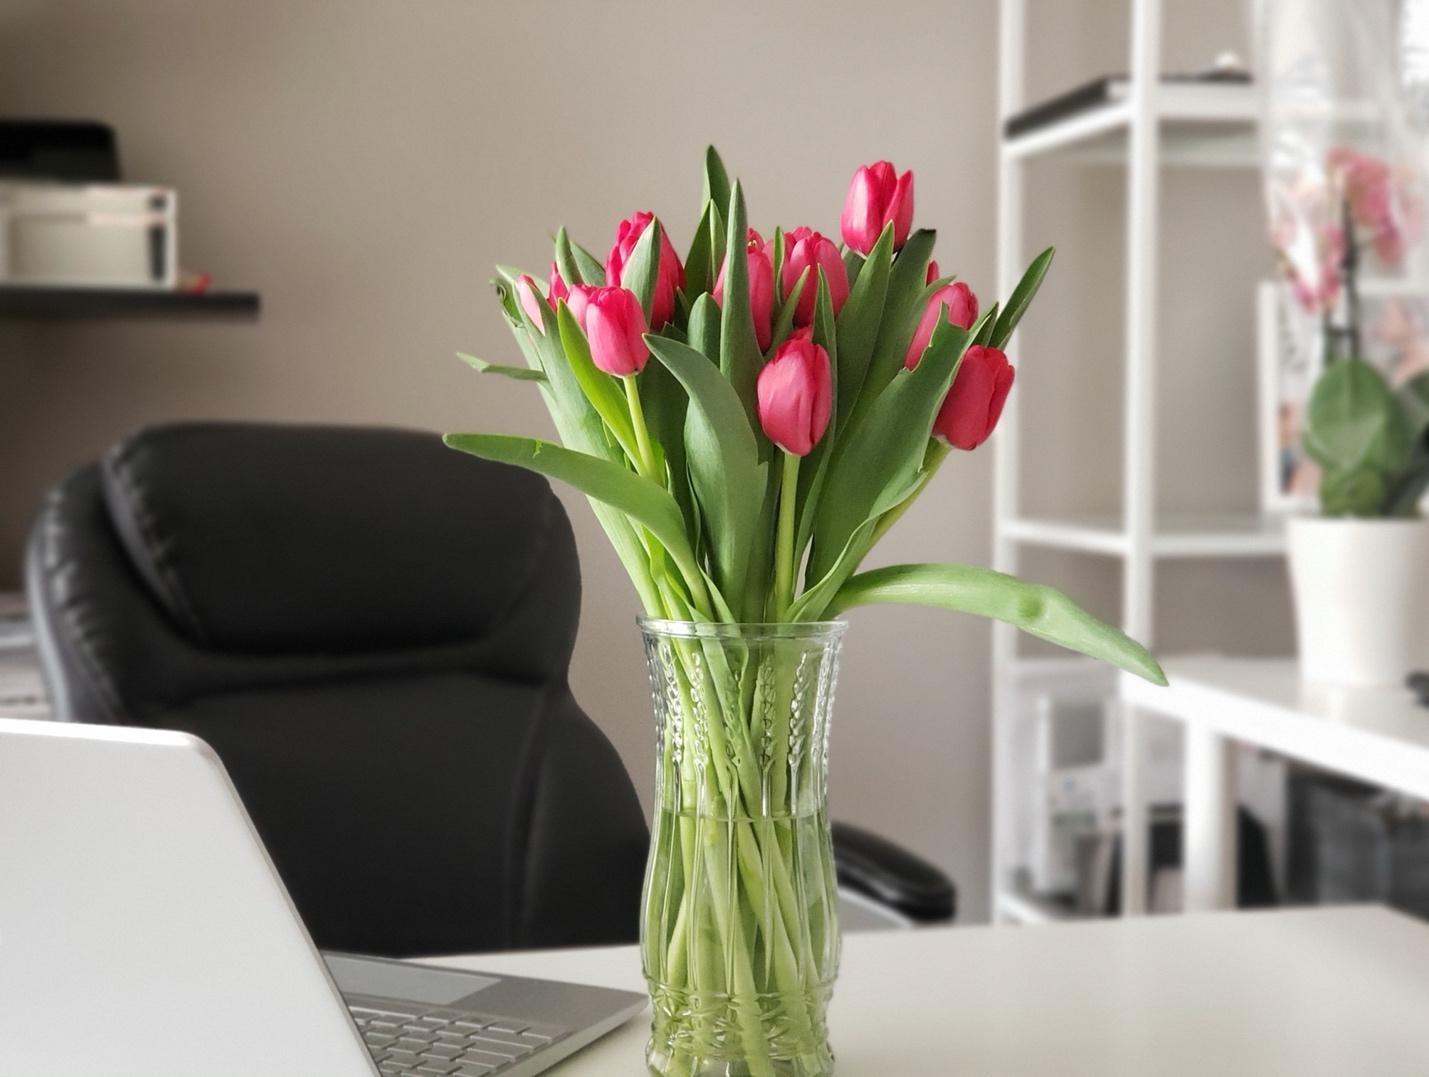 Incorporating Office Flowers into Your Workspace